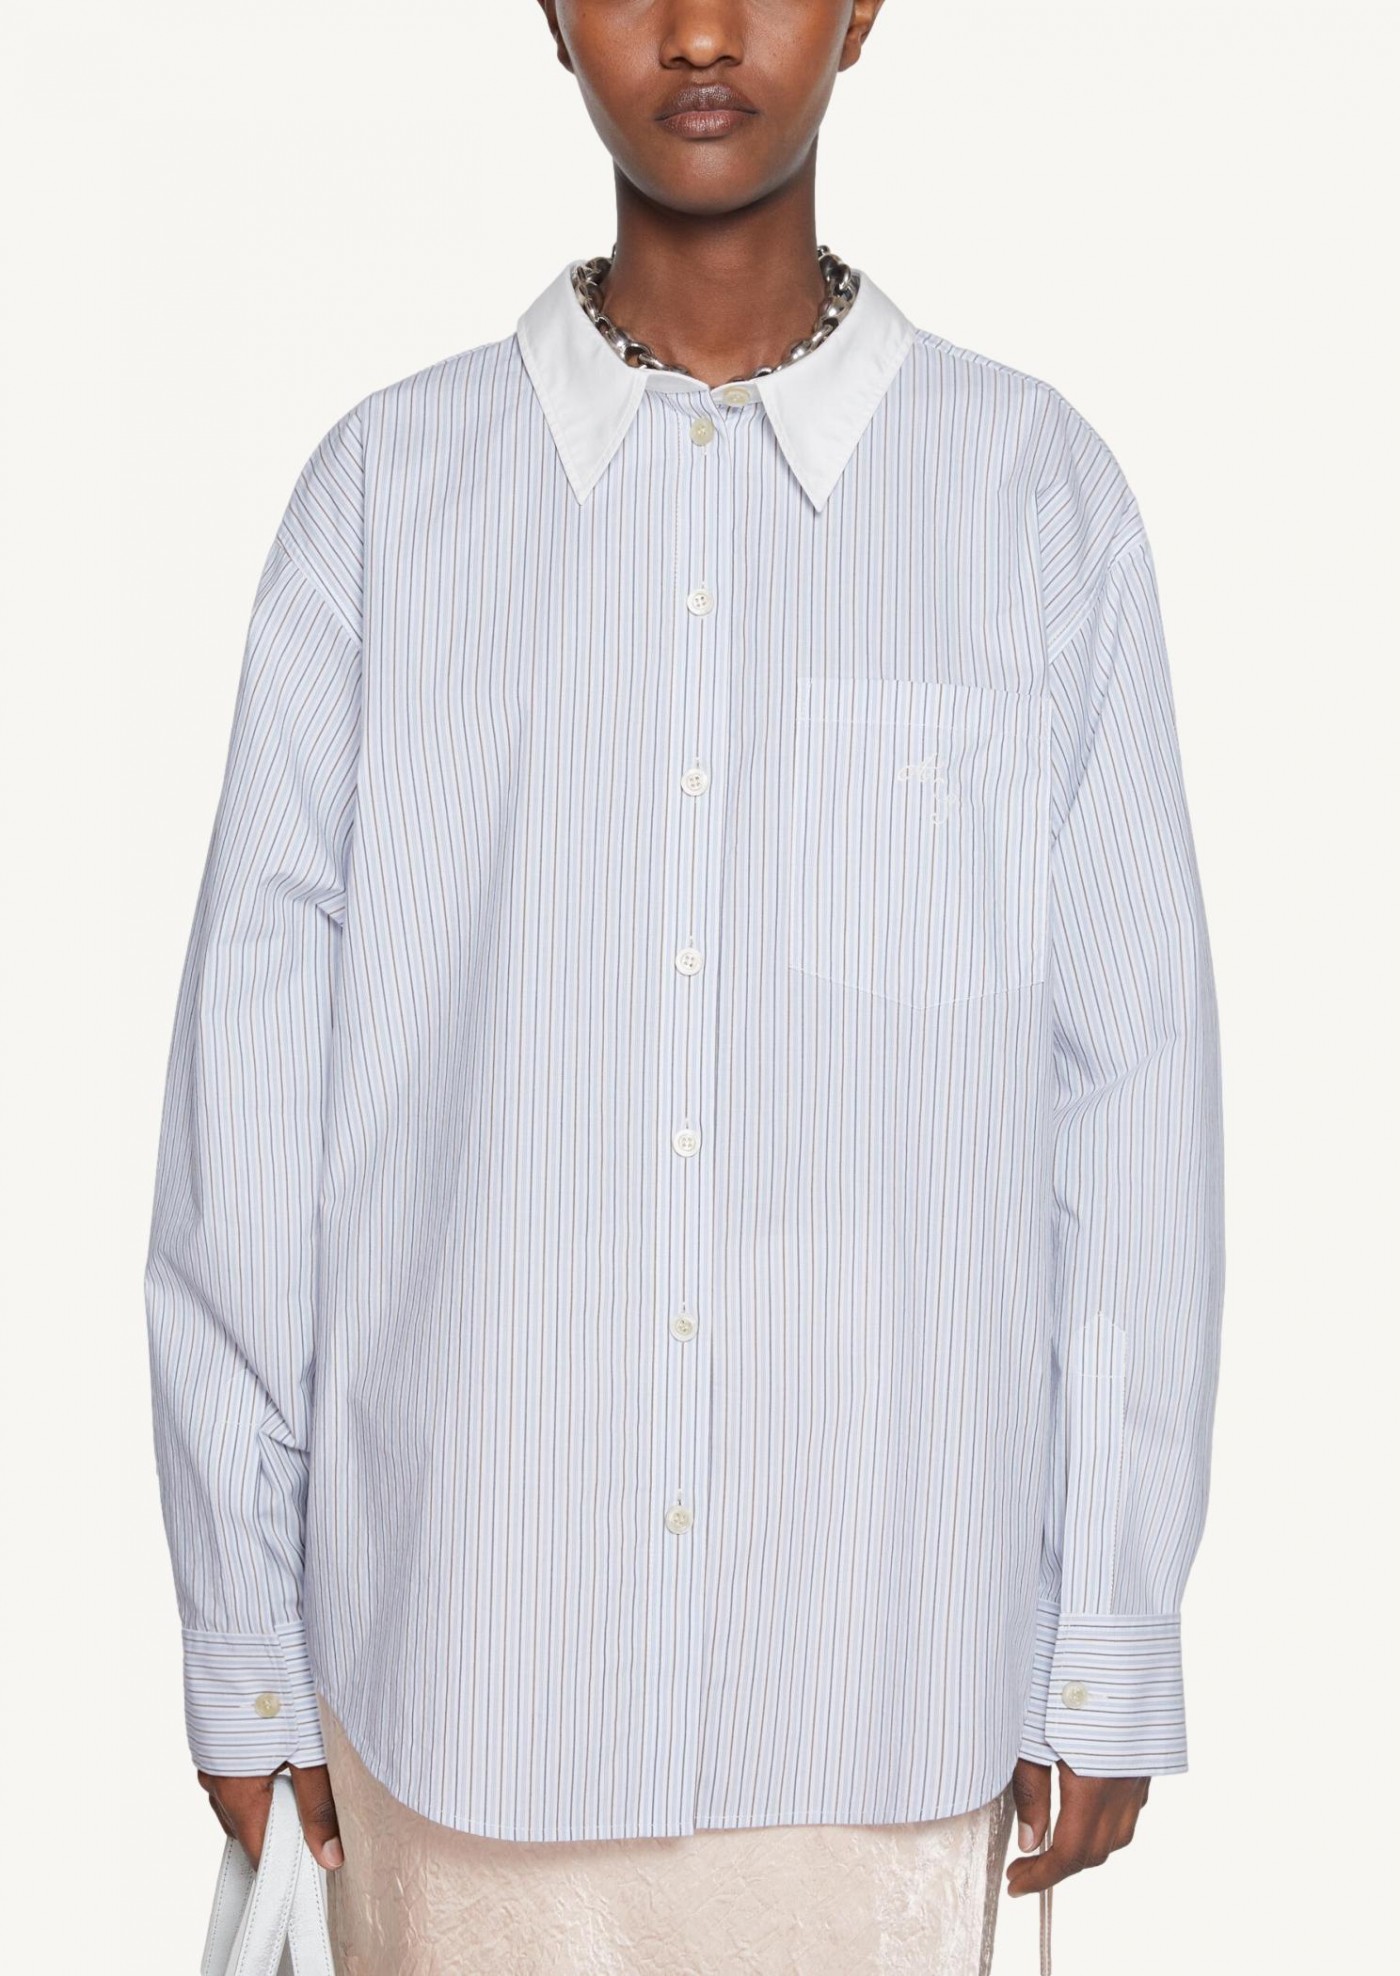 Stripe button up shirt dusty blue/cold brown